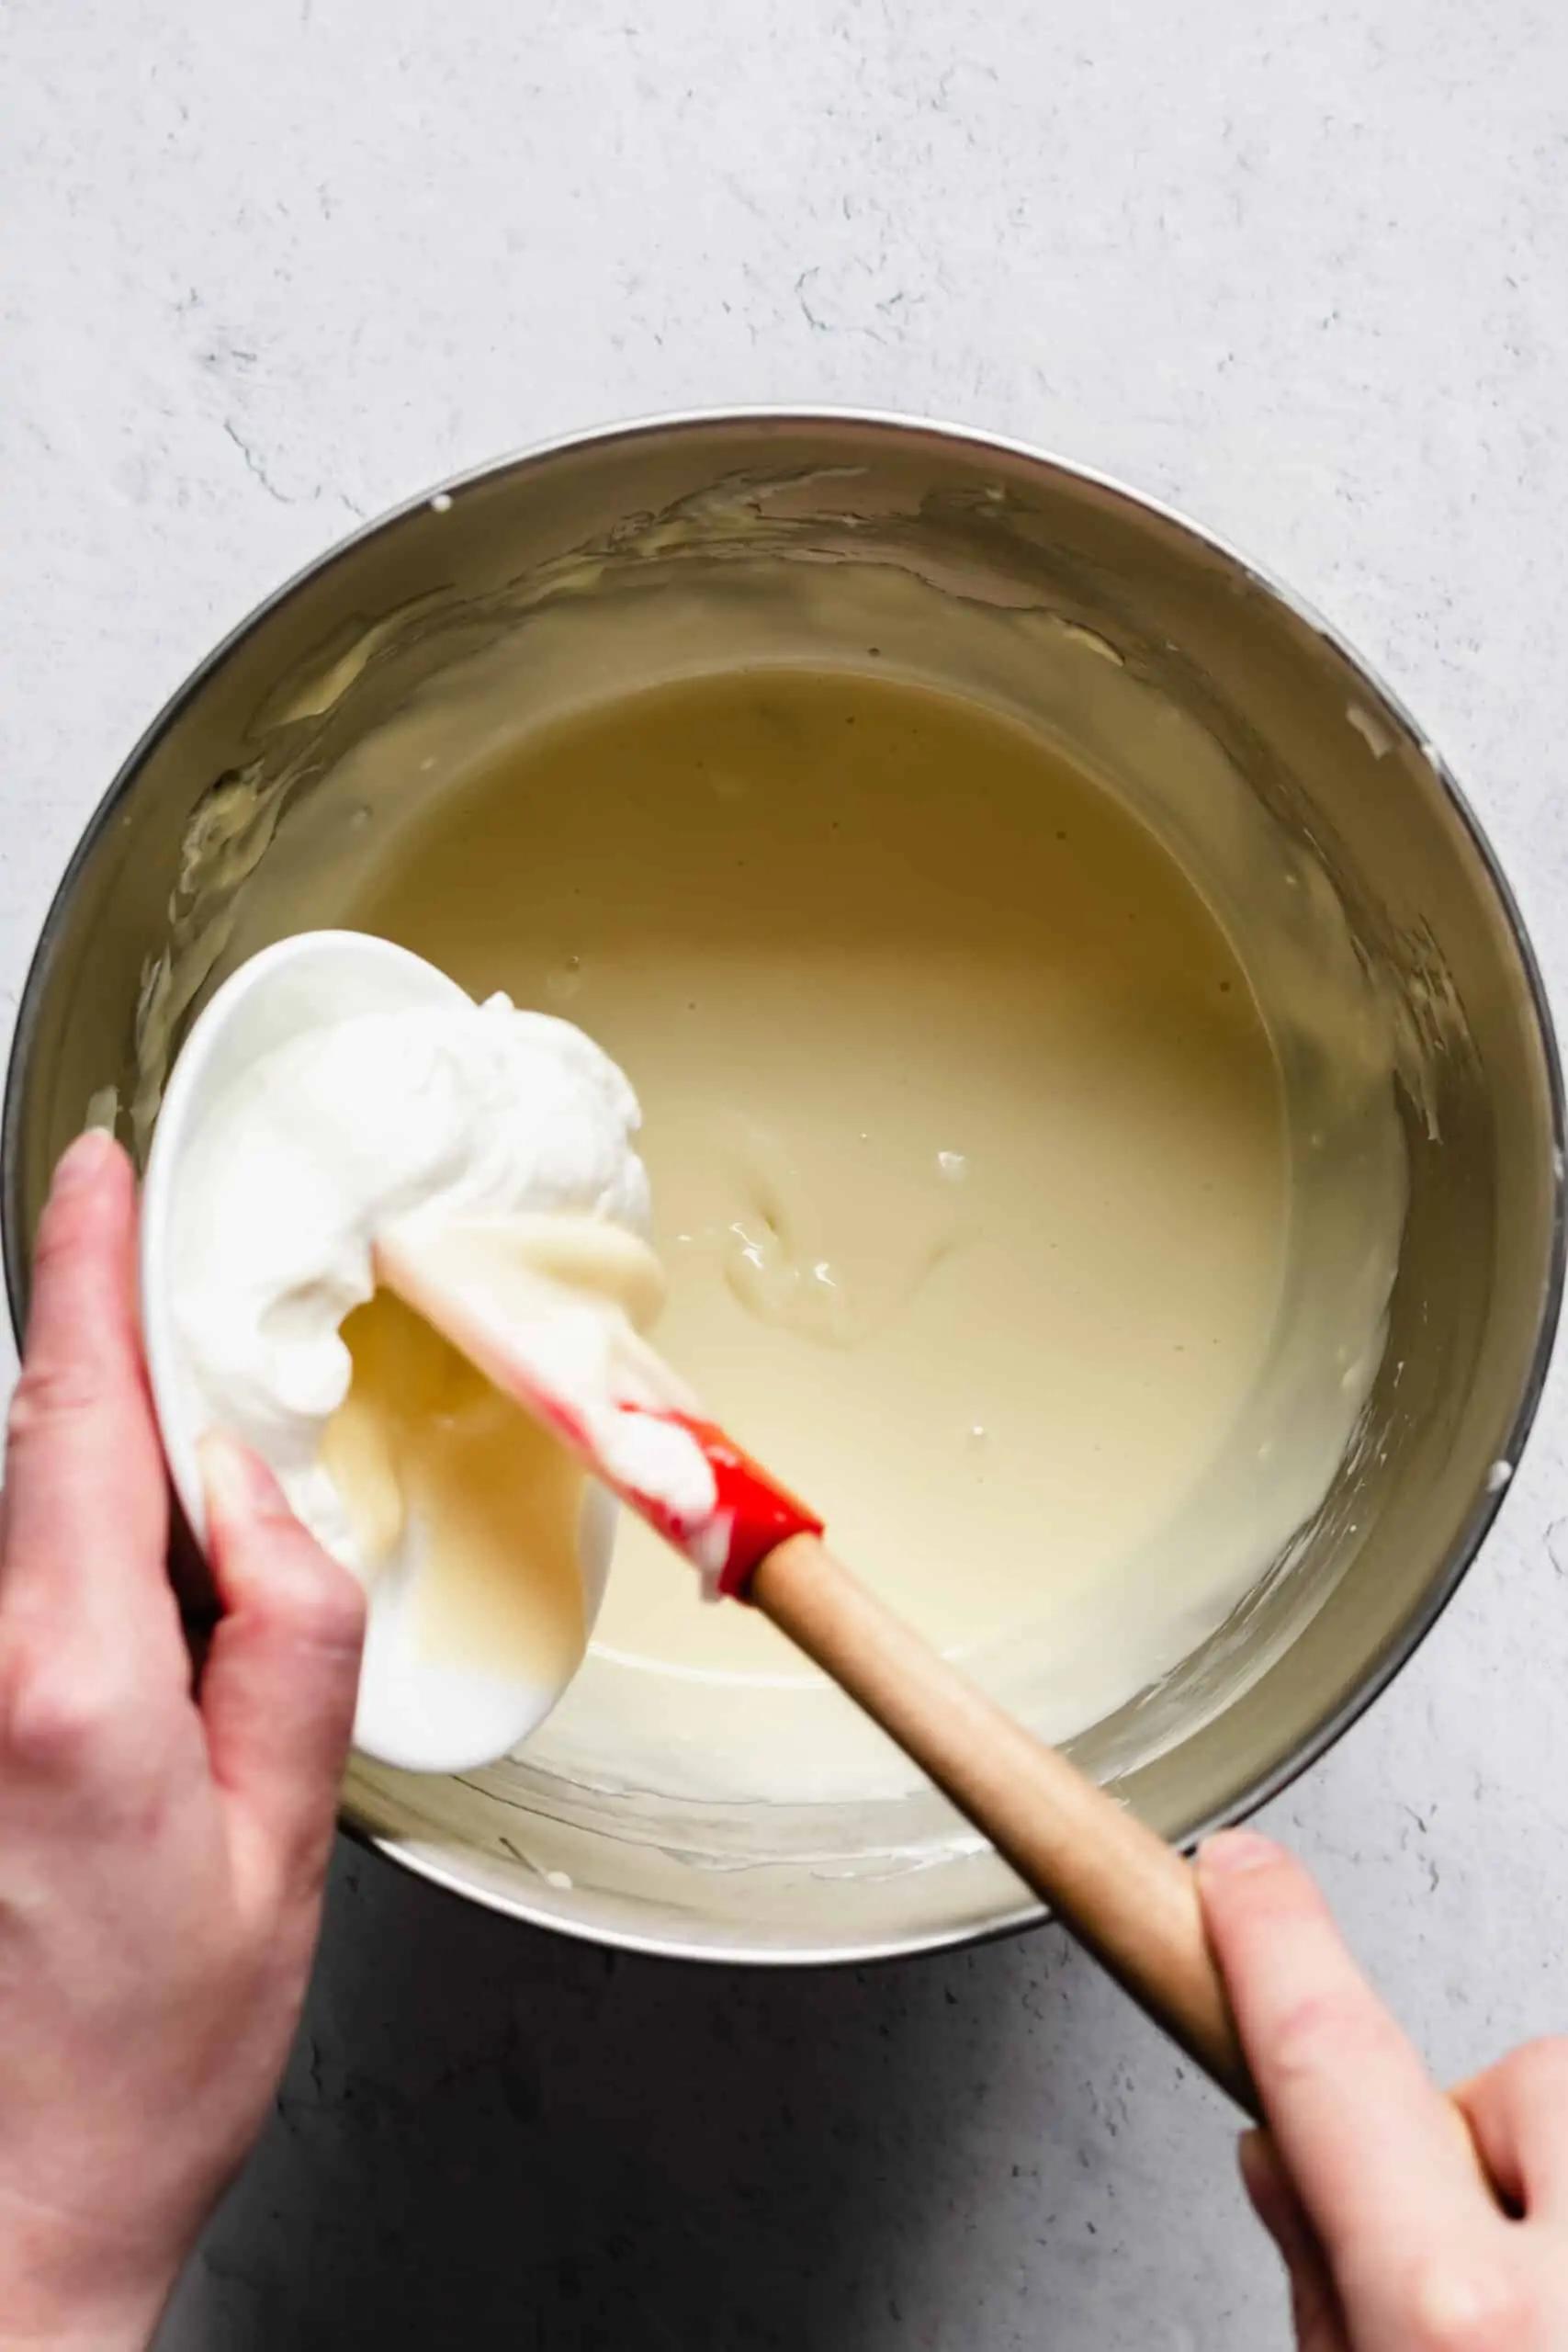 Sour cream being added to cheesecake batter in a bowl.